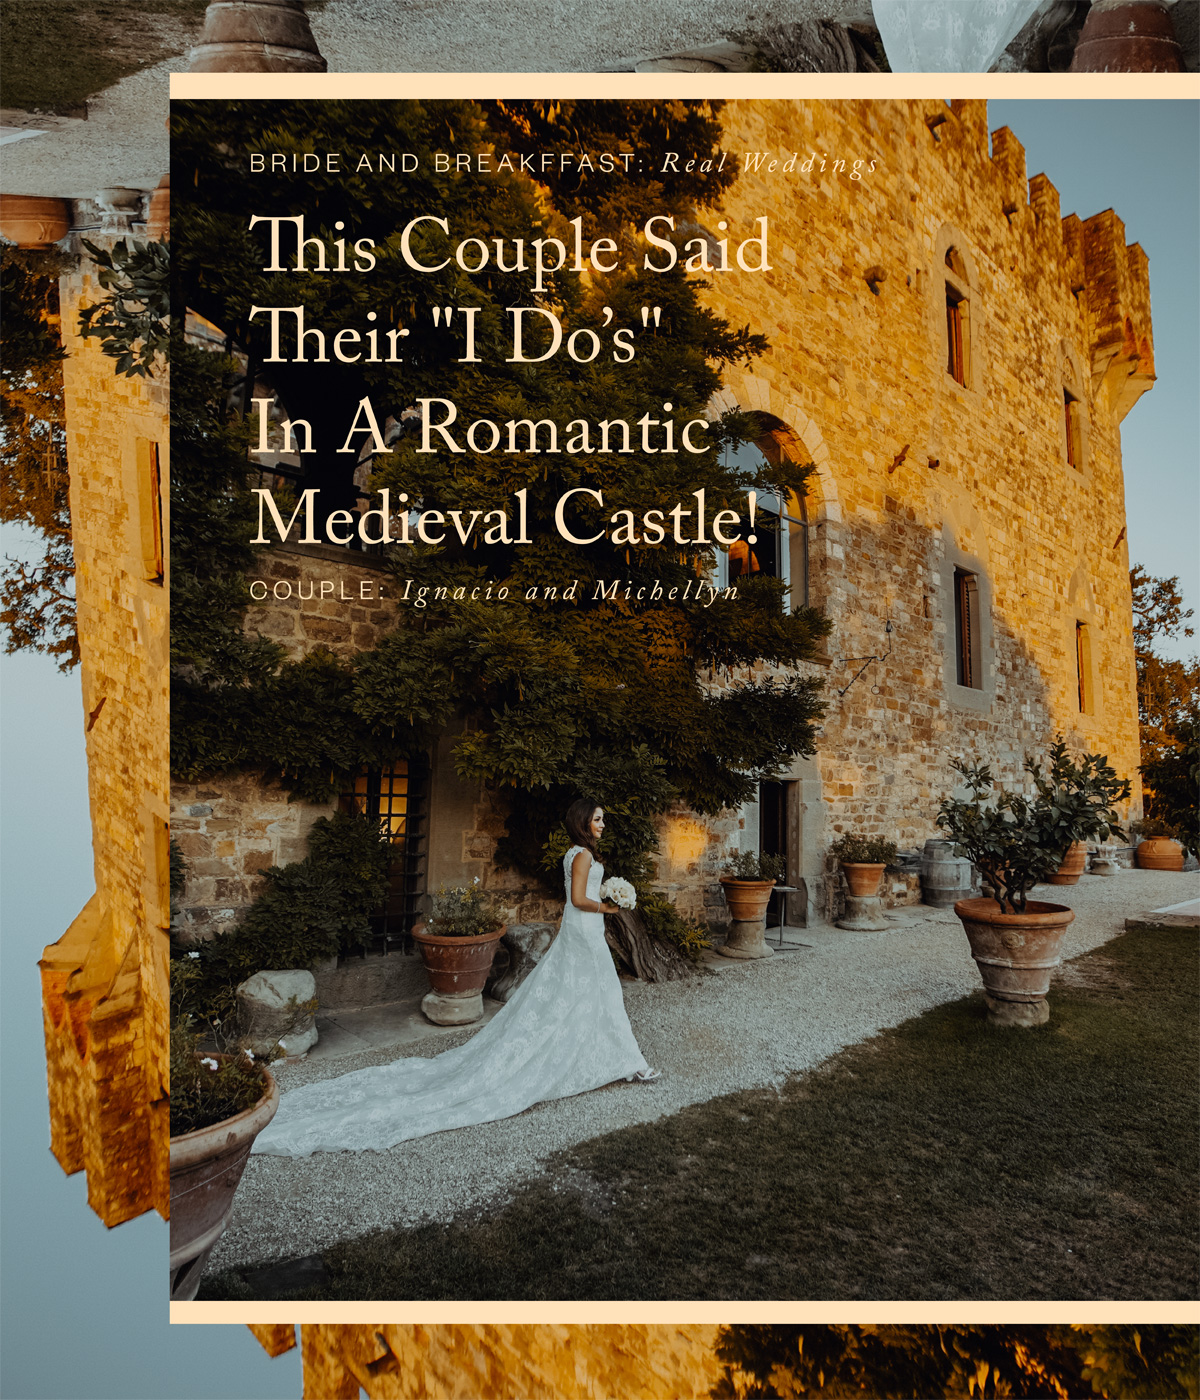 This Couple Said Their "I Do's" in A Romantic Medieval Castle!